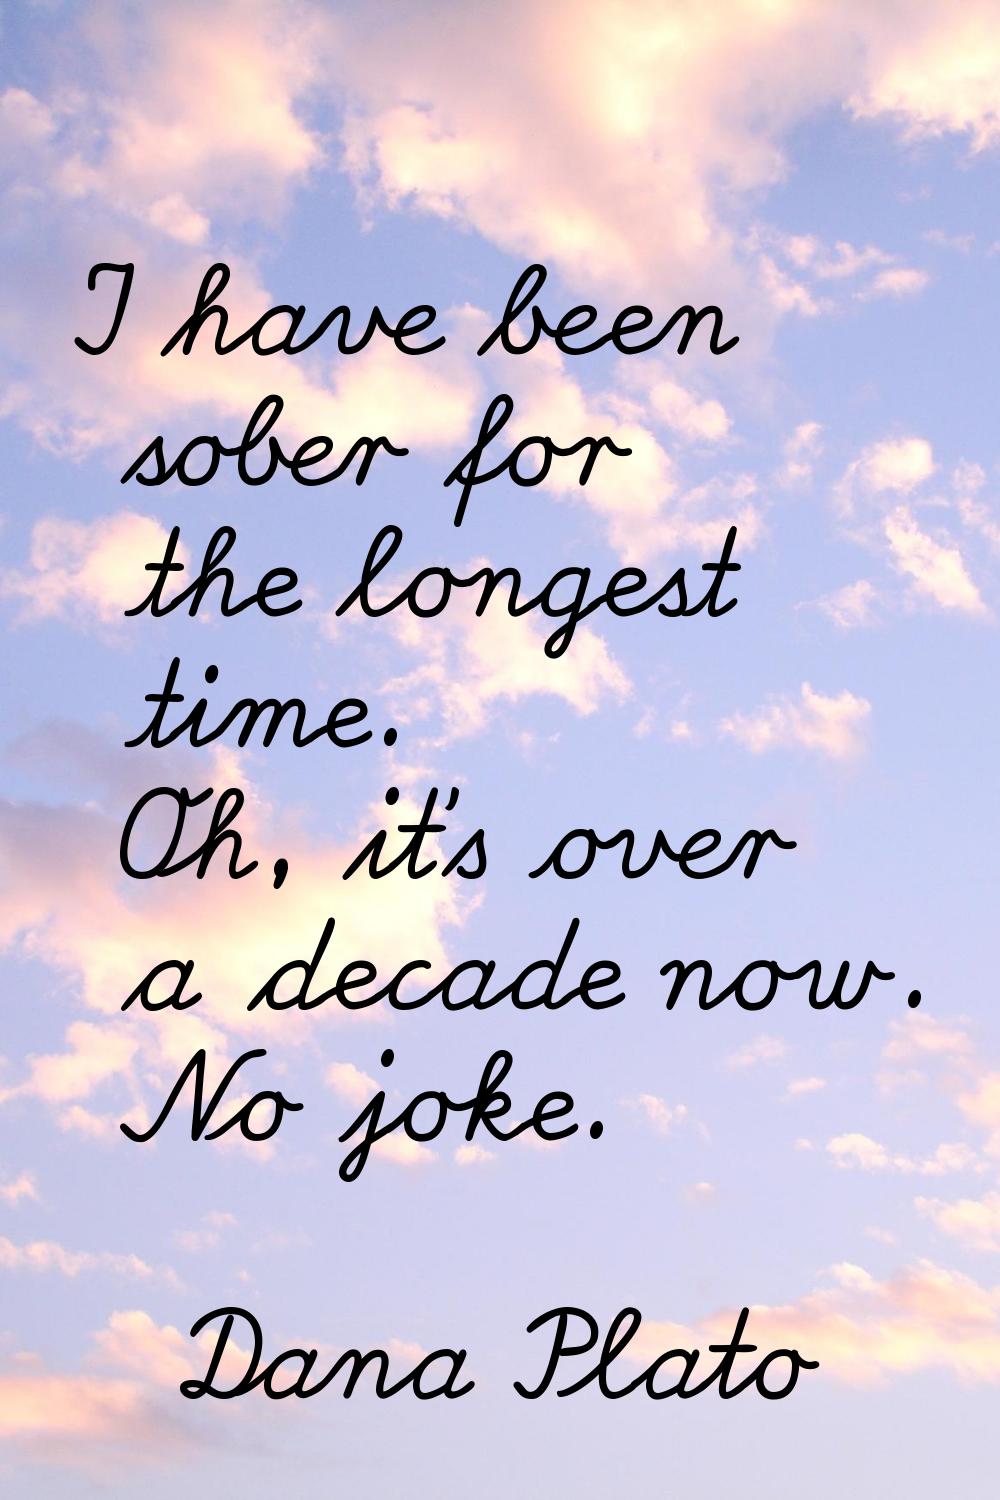 I have been sober for the longest time. Oh, it's over a decade now. No joke.